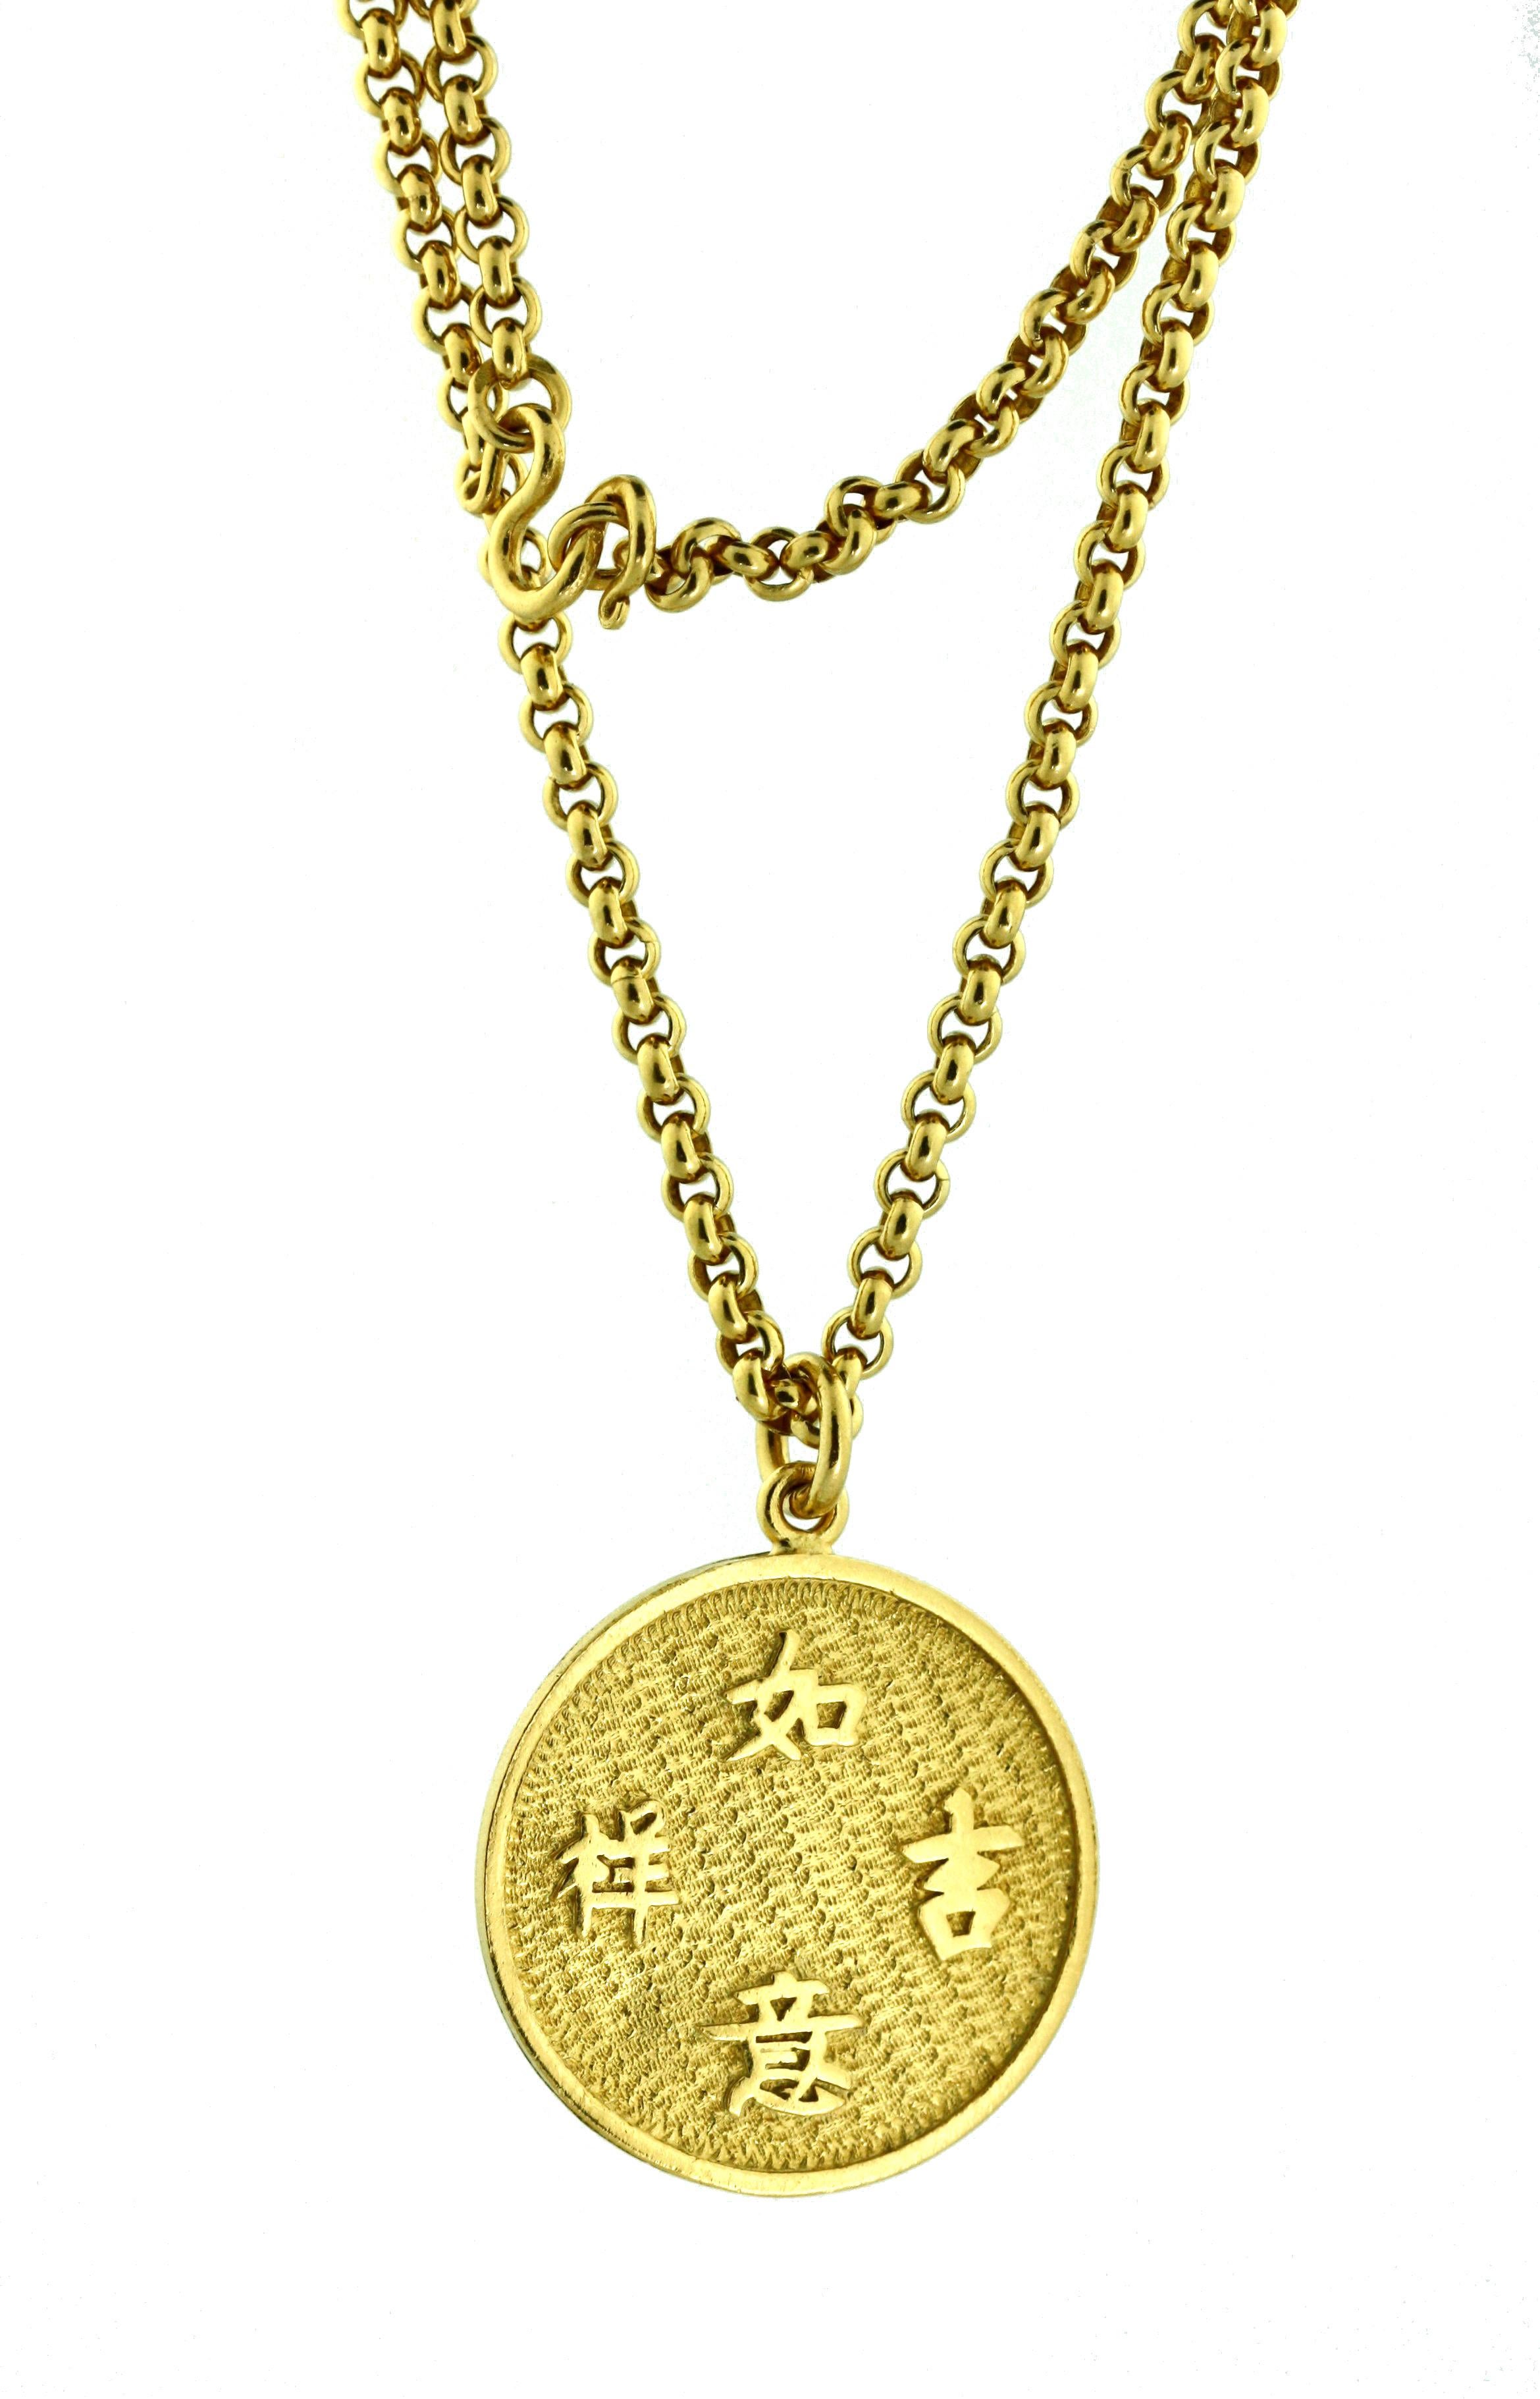 
A SouthEast Asian 24 karat gold pendant with necklace, Chinese, 20th century, necklace of braided gold links, pendant with four Chinese characters, Length approximately 14 inches,
gross weight approximately 29.3 dwts, 45 grams